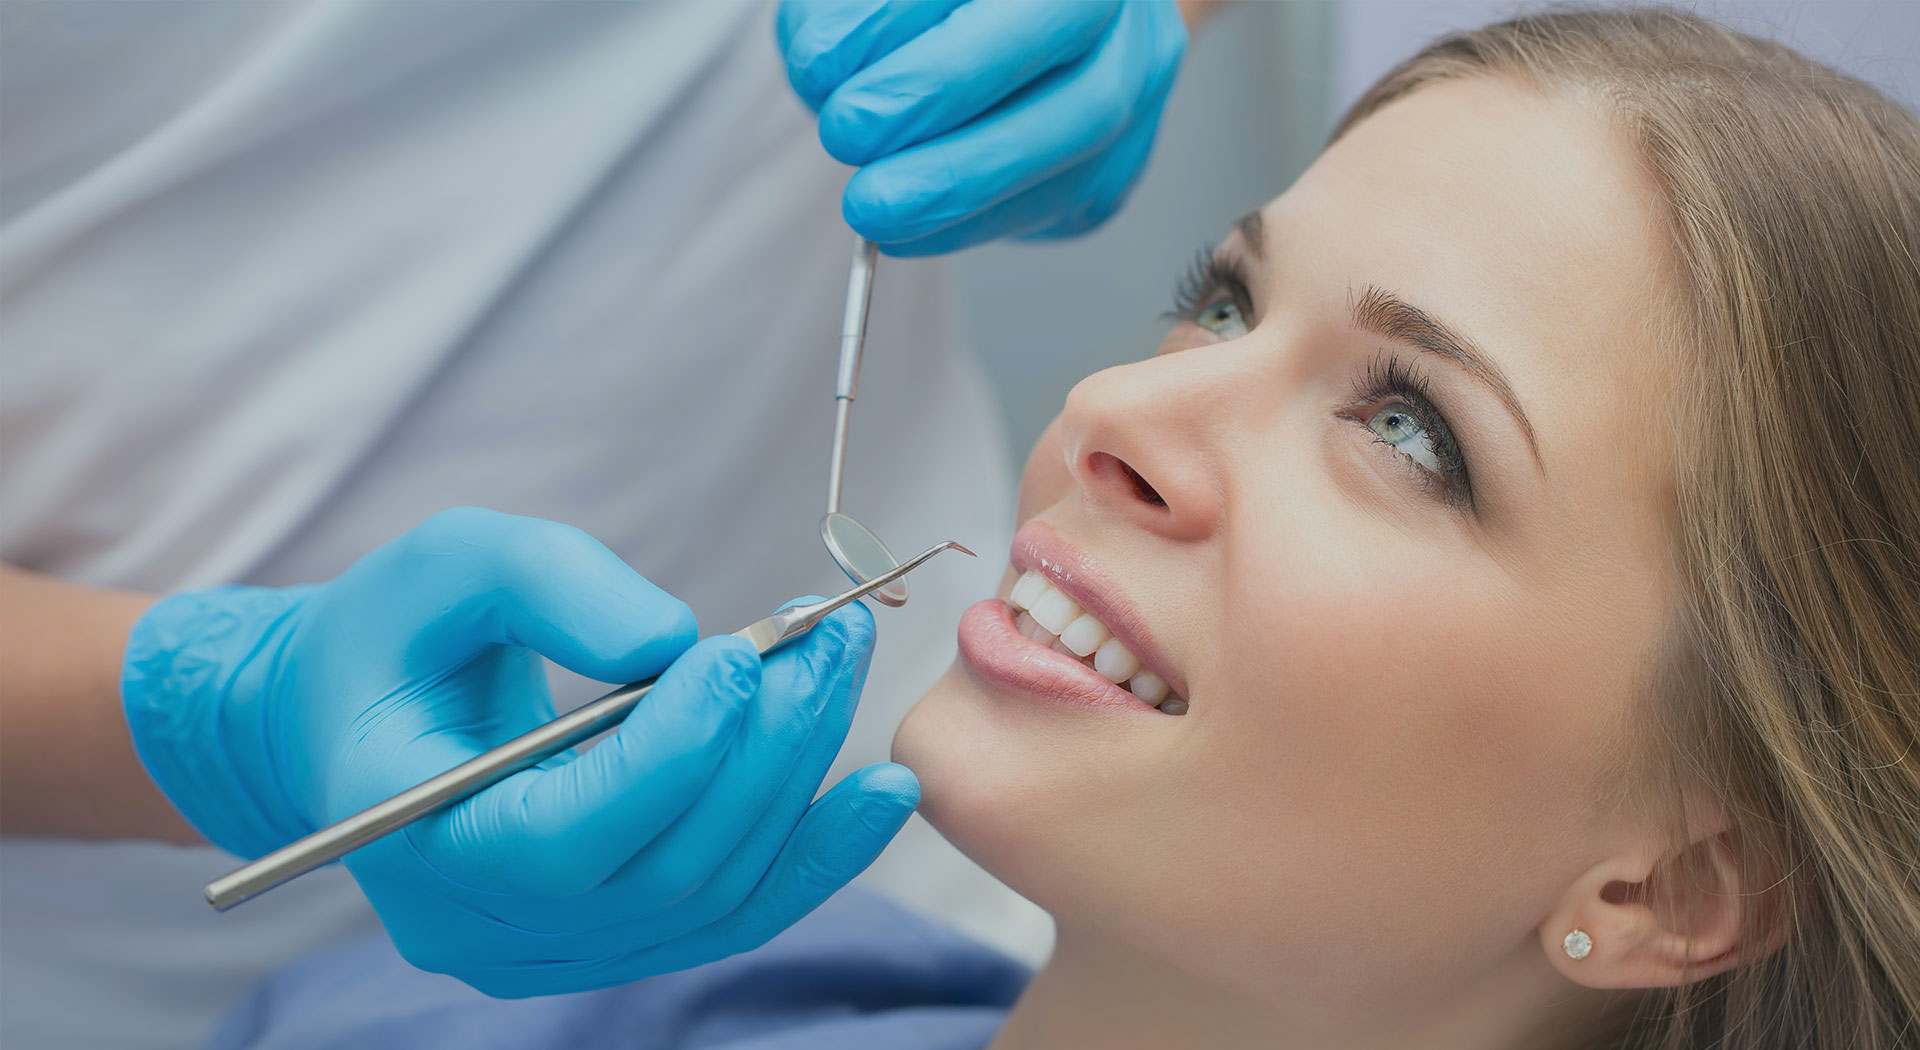 Can a tooth with root canal treatment still hurt?